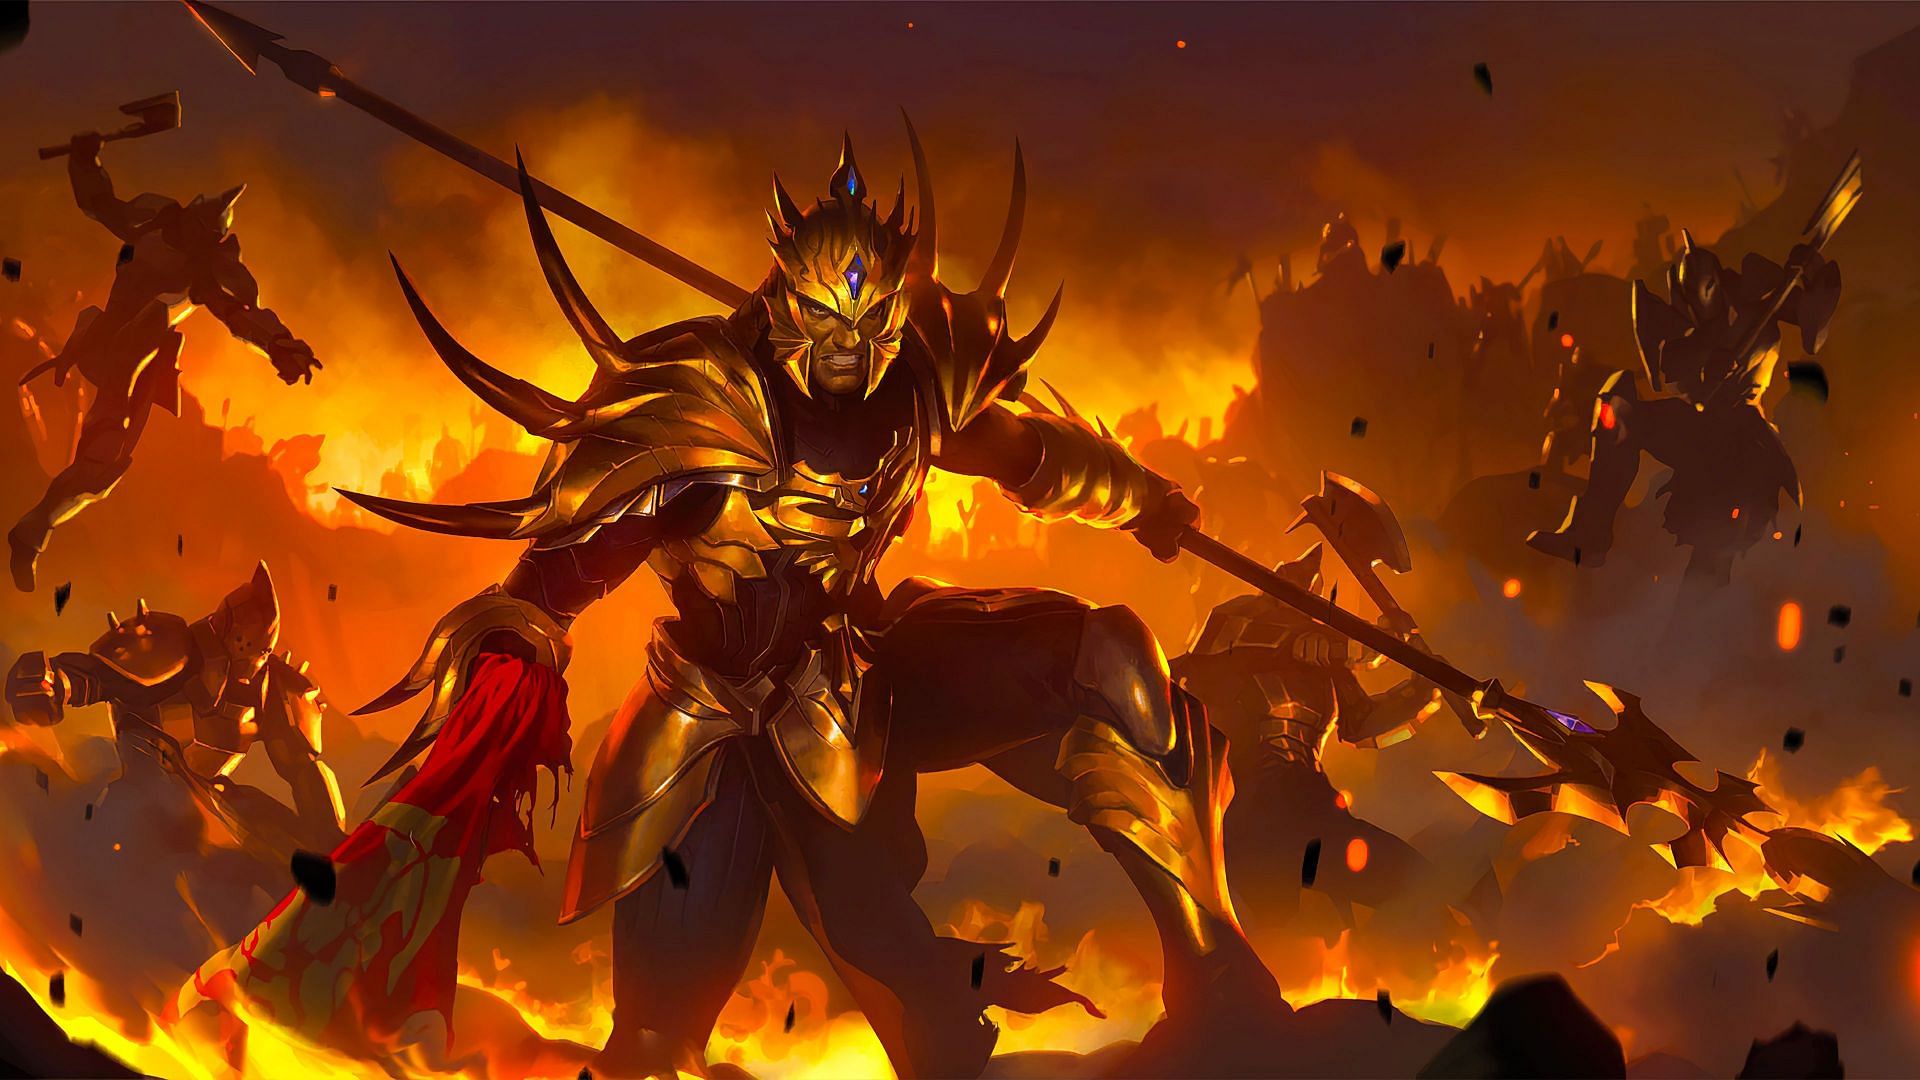 Prince Jarvan, the scion of the Lightshield dynasty, is Demacia's heir apparent. (Image via Riot Games)